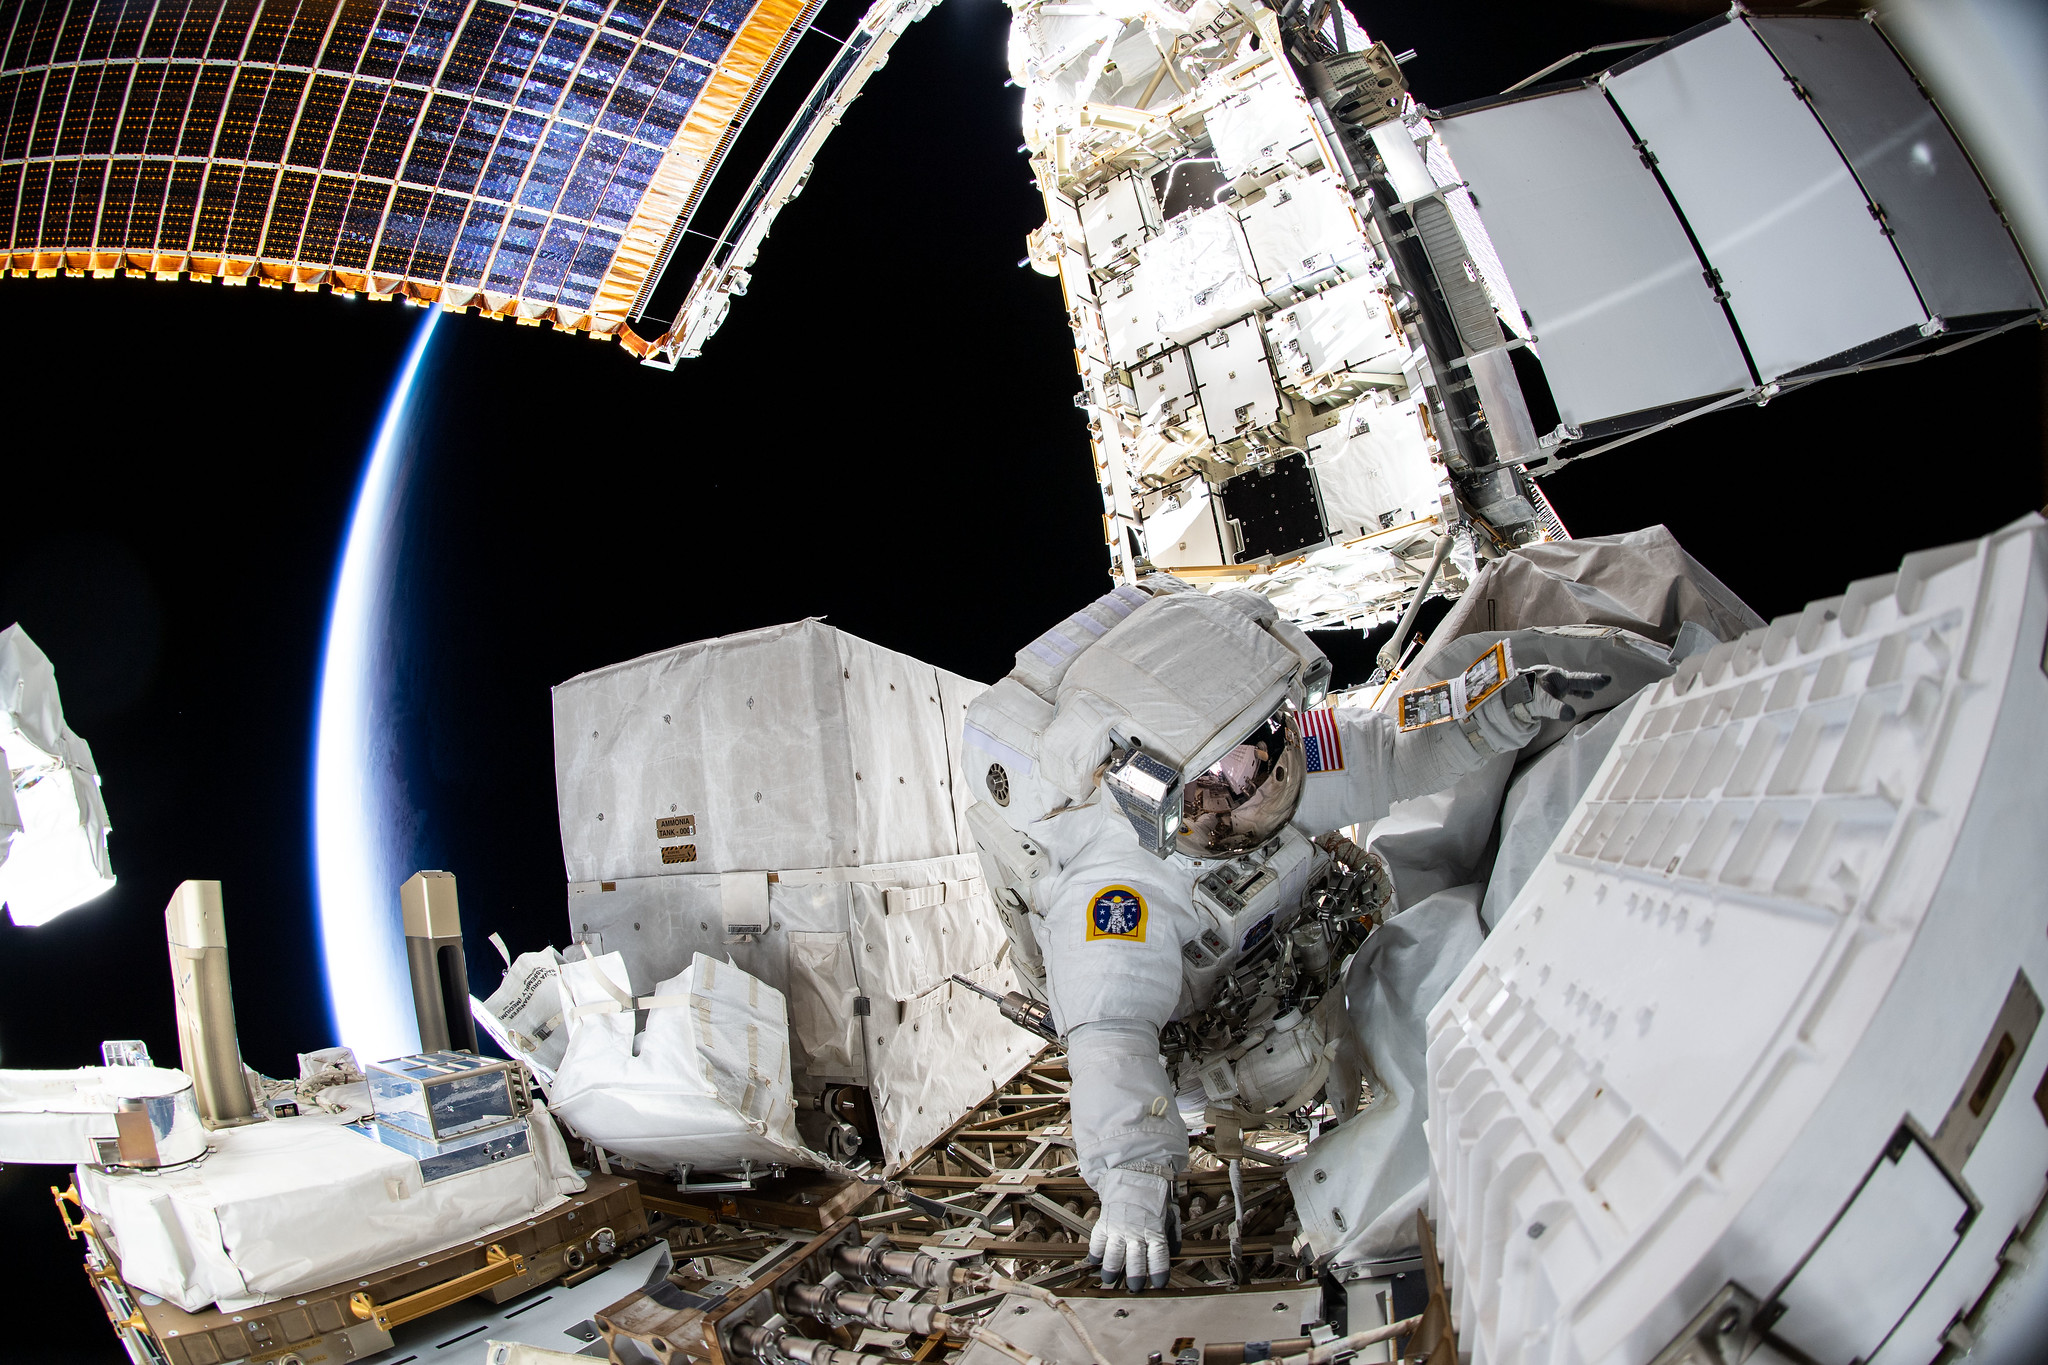 NASA spacewalker Kayla Barron is pictured during a six-hour and 32 minute spacewalk on Dec. 2, 2021, to replace a failed antenna system on the International Space Station's Port-1 truss structure.